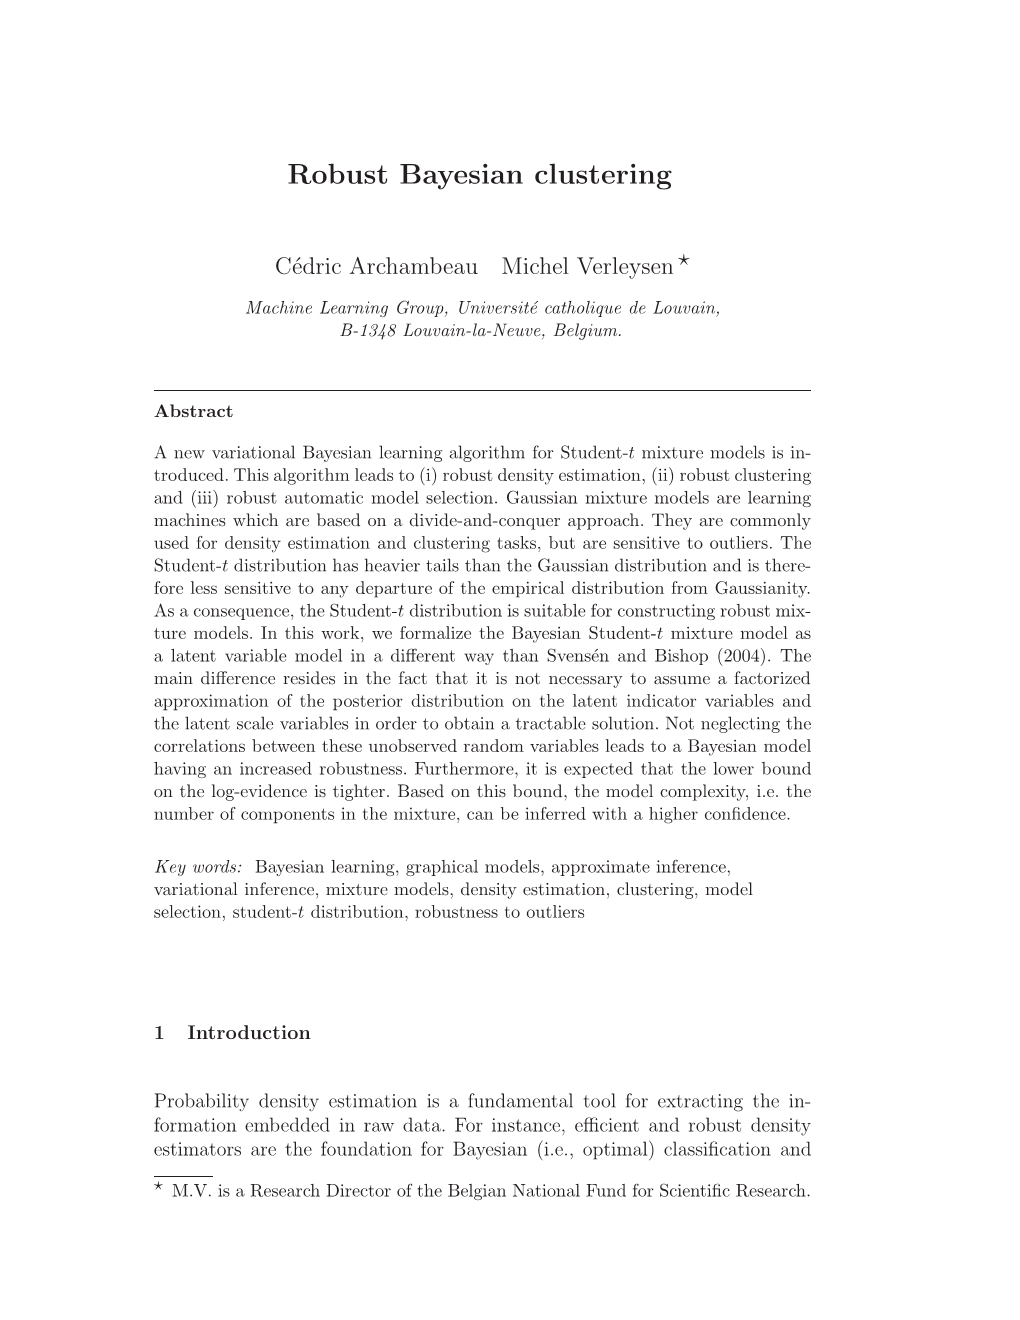 Robust Bayesian Clustering